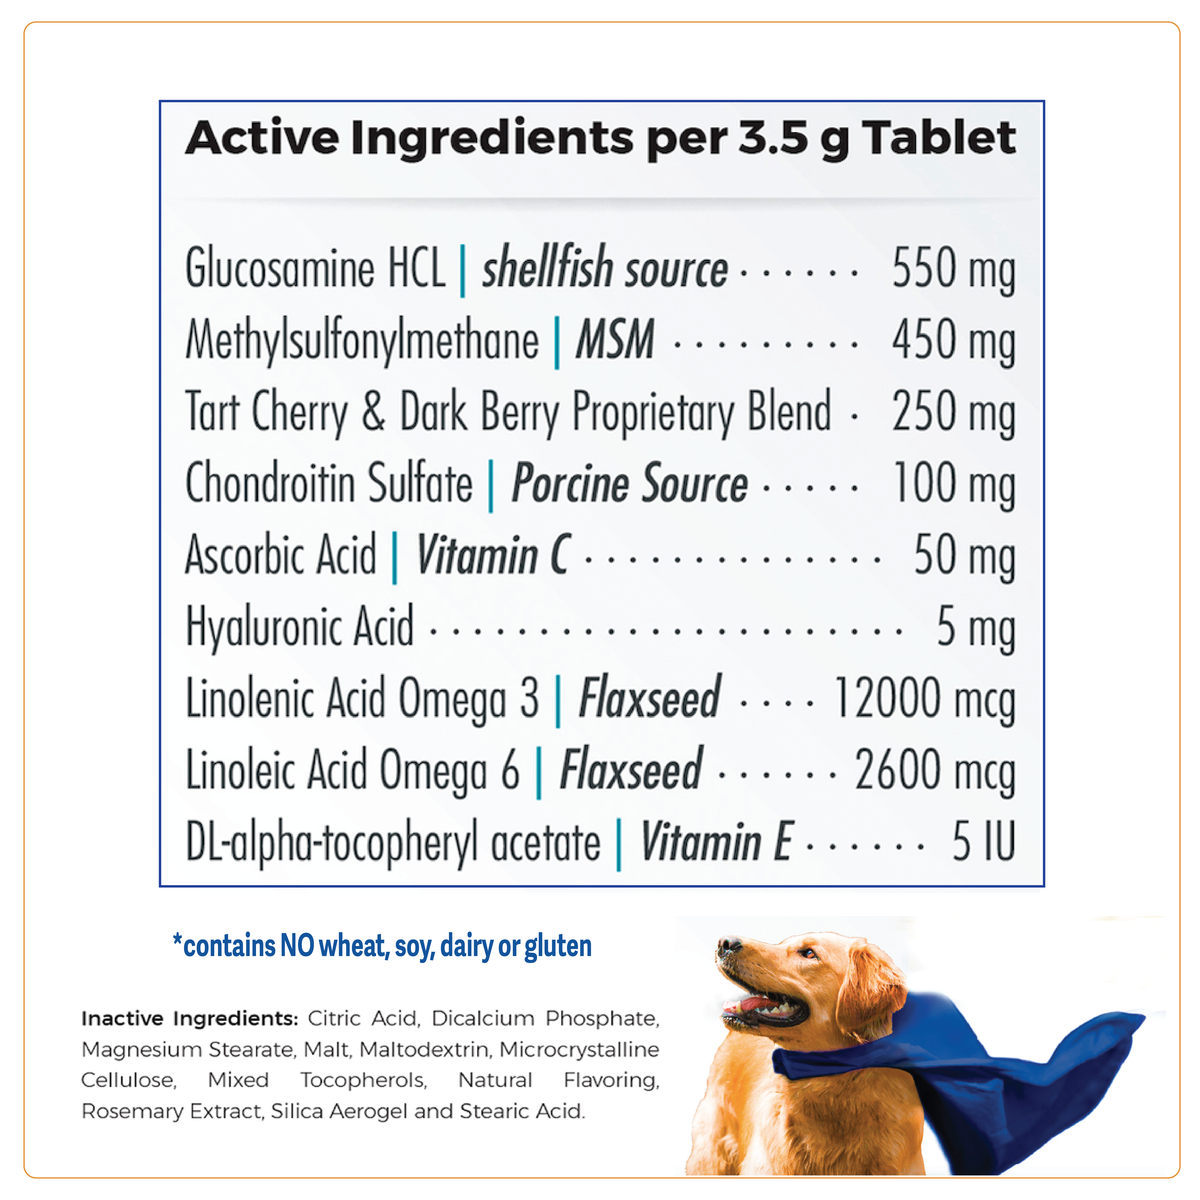 chart showing active ingredients in each tablet of wagworthy naturals hip and joint supplement for dogs